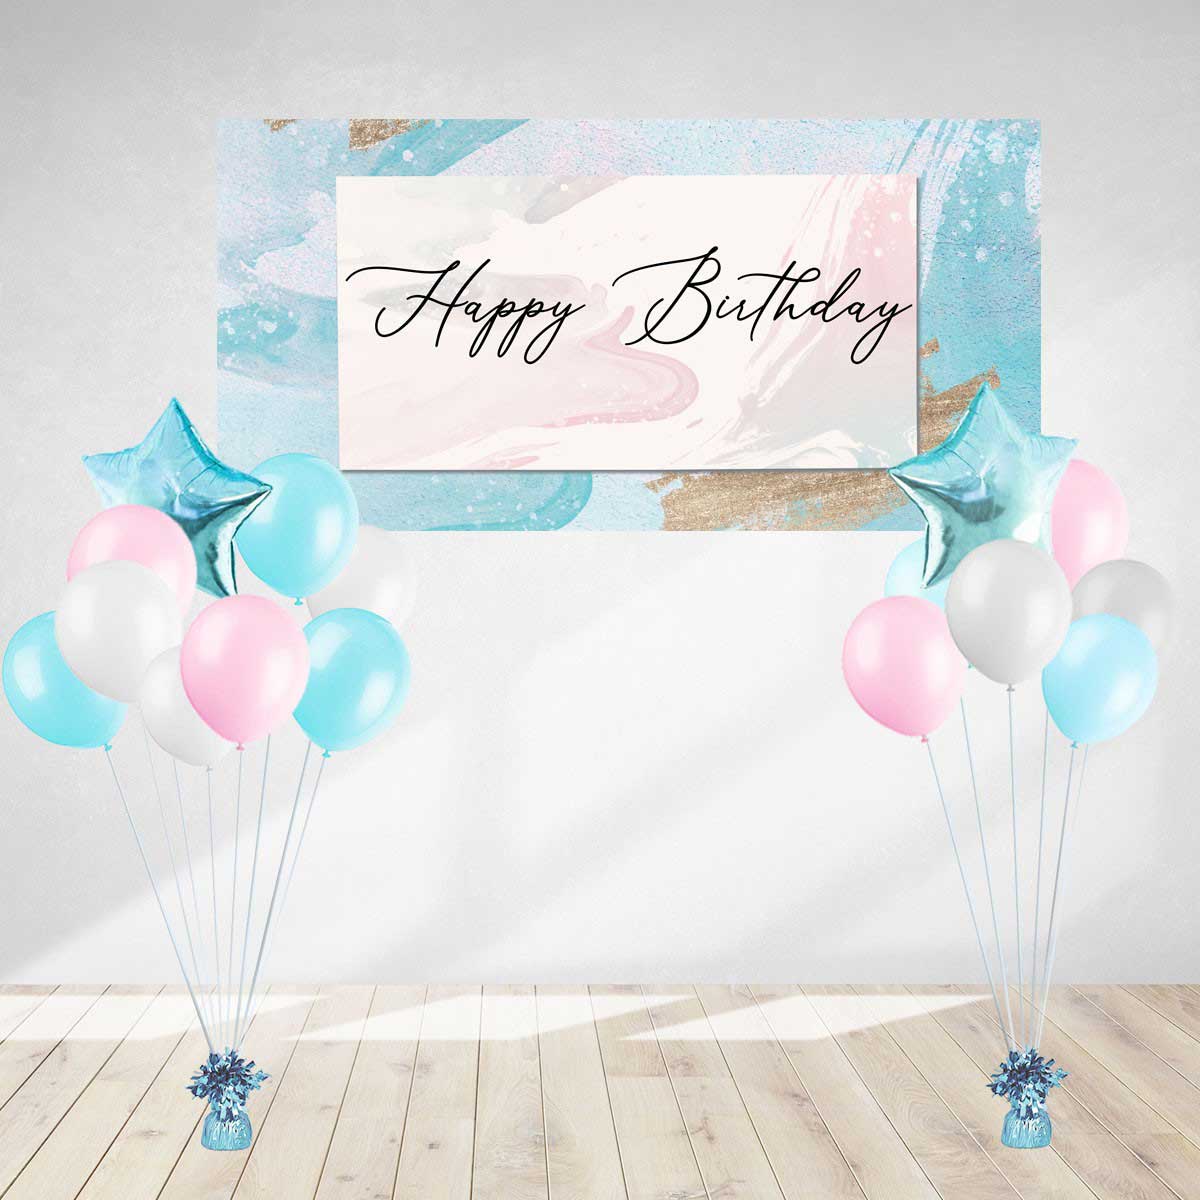 Elegant and classy birthday banner with cursive font setup with some lovely balloons for your birthday photo shoot.